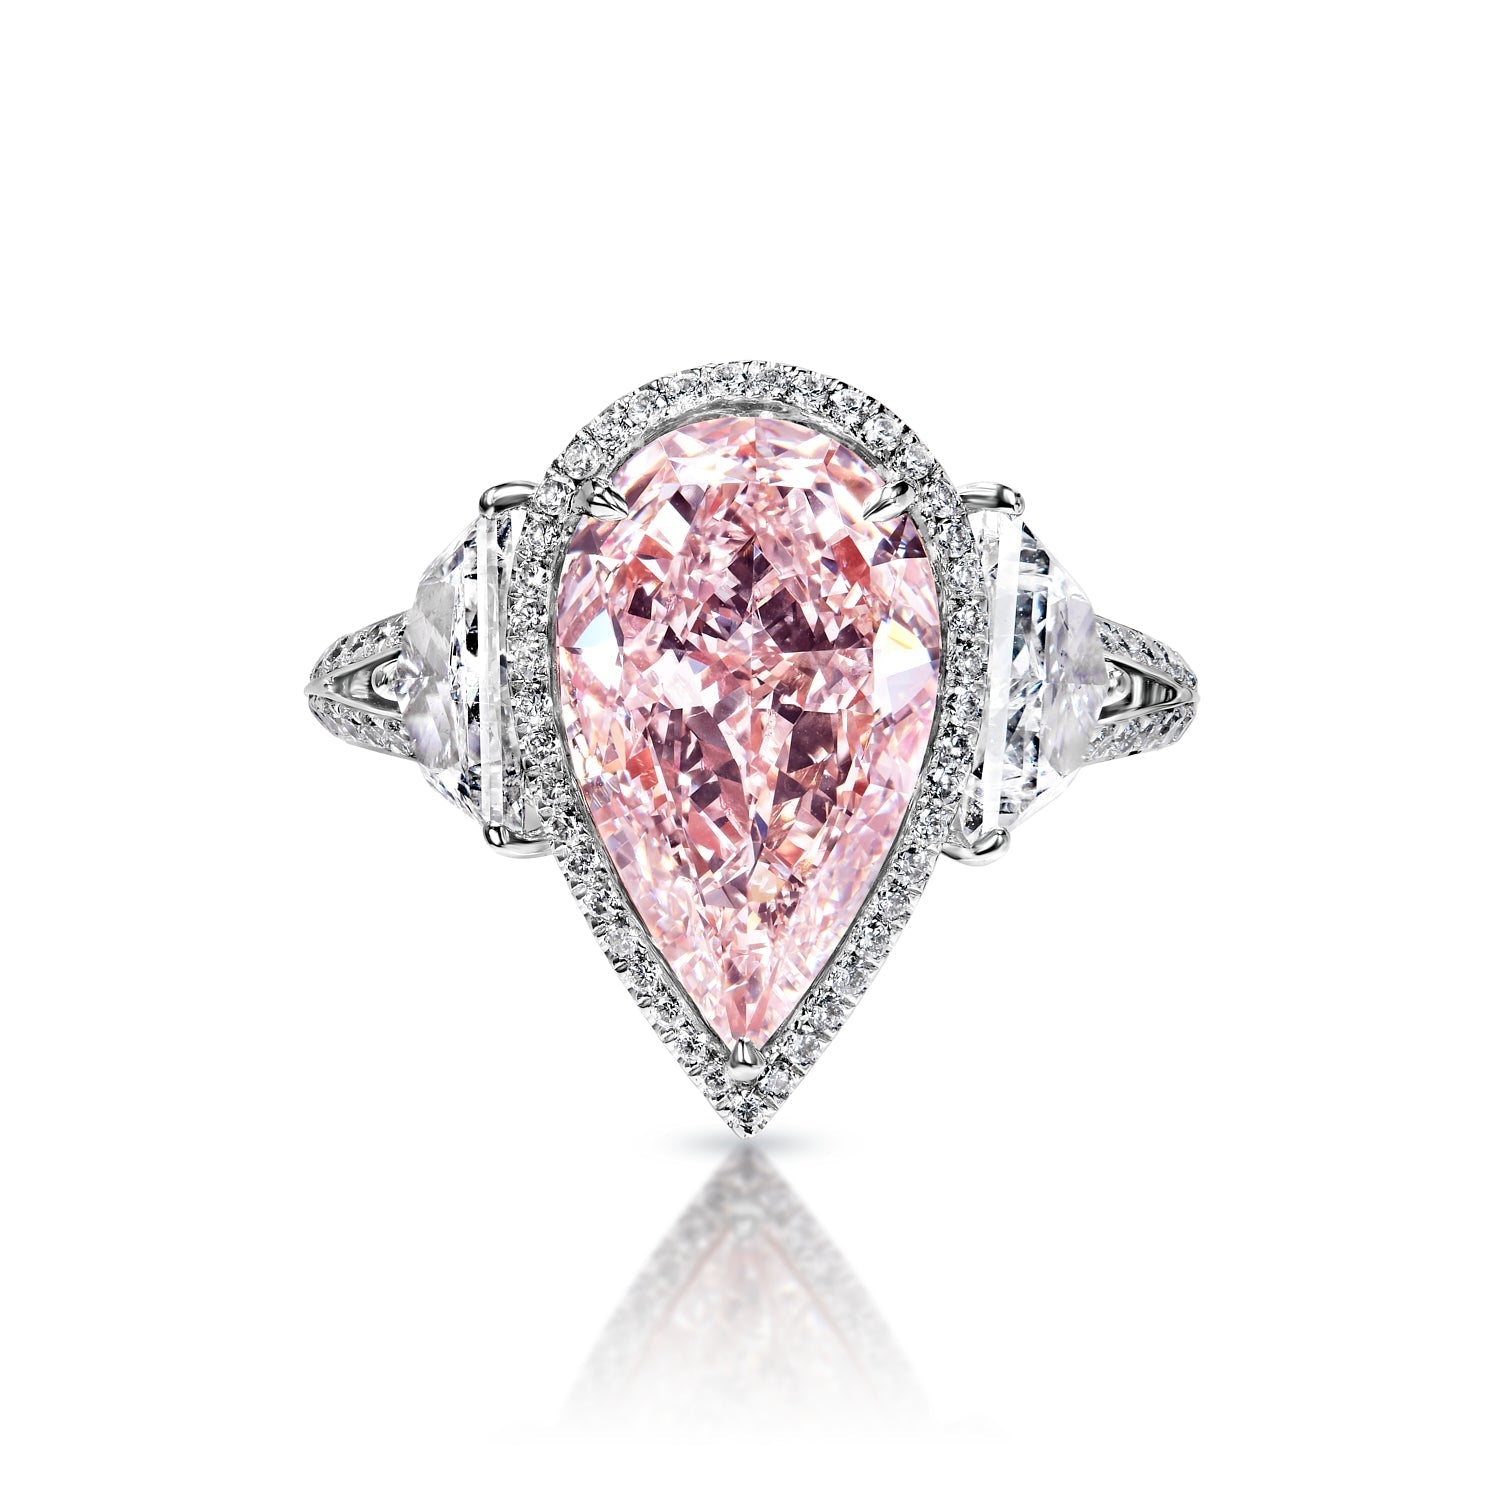 Ximena 5 Carat Light Pink VS2 Pear Shape Diamond Engagement Ring in 18k White Gold Front View